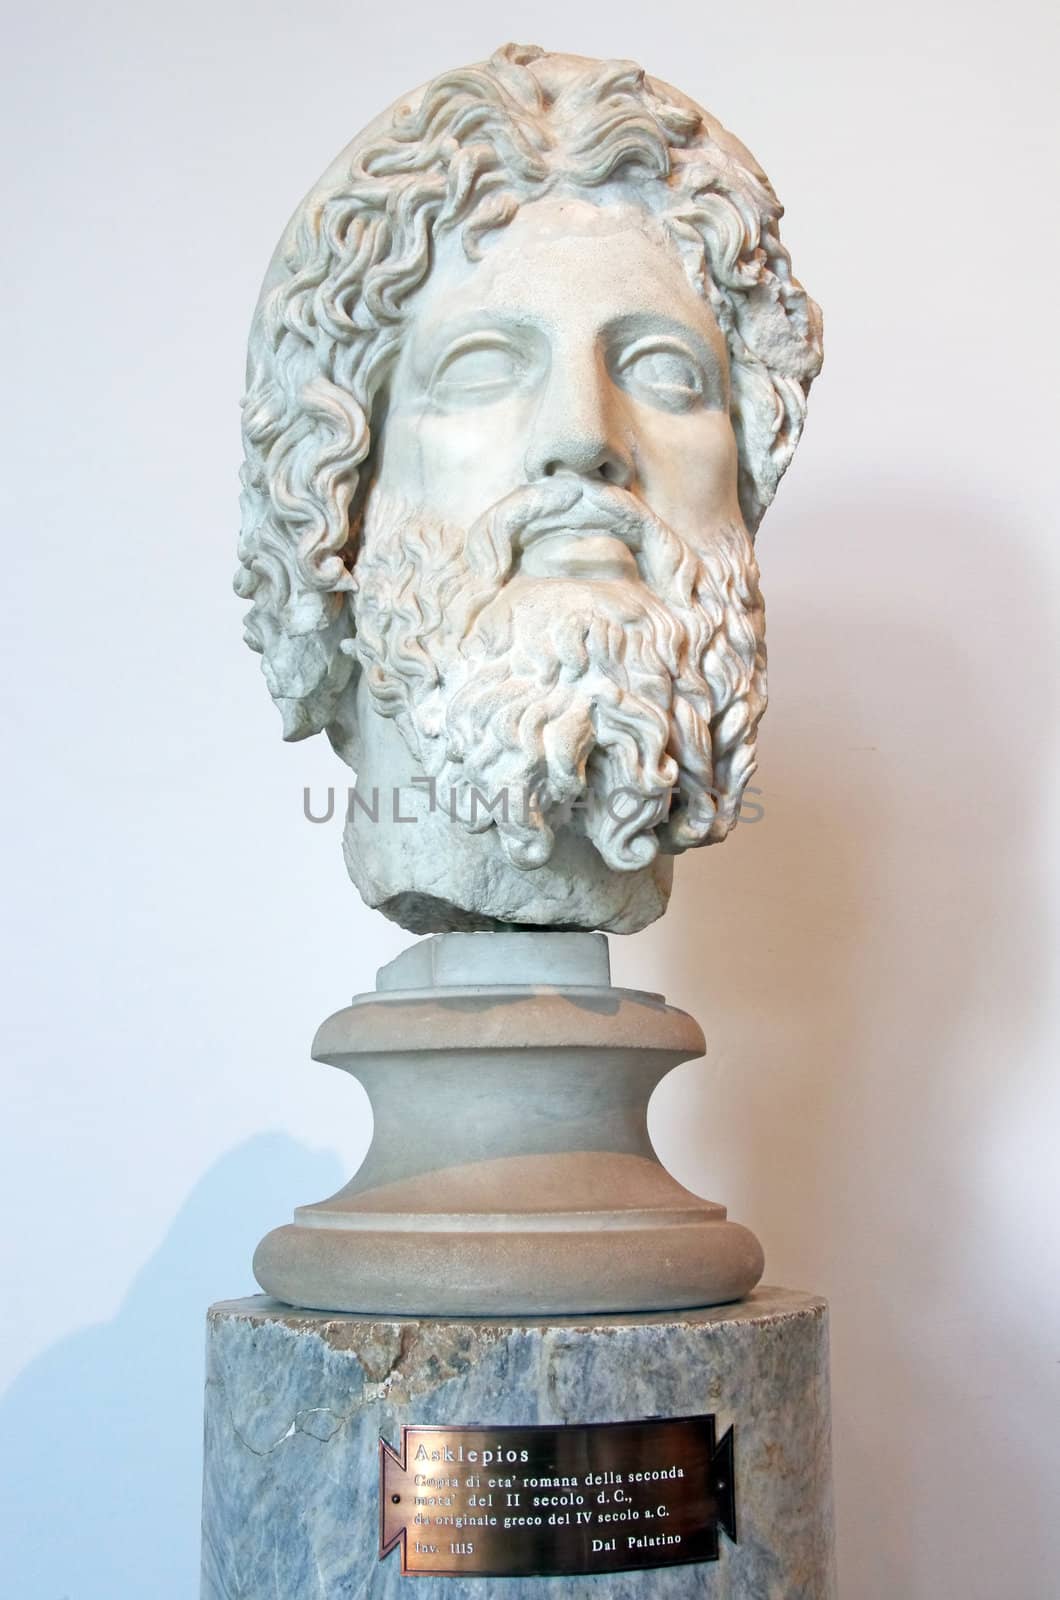 The god of medicine, Asclepius in Palatine Museum